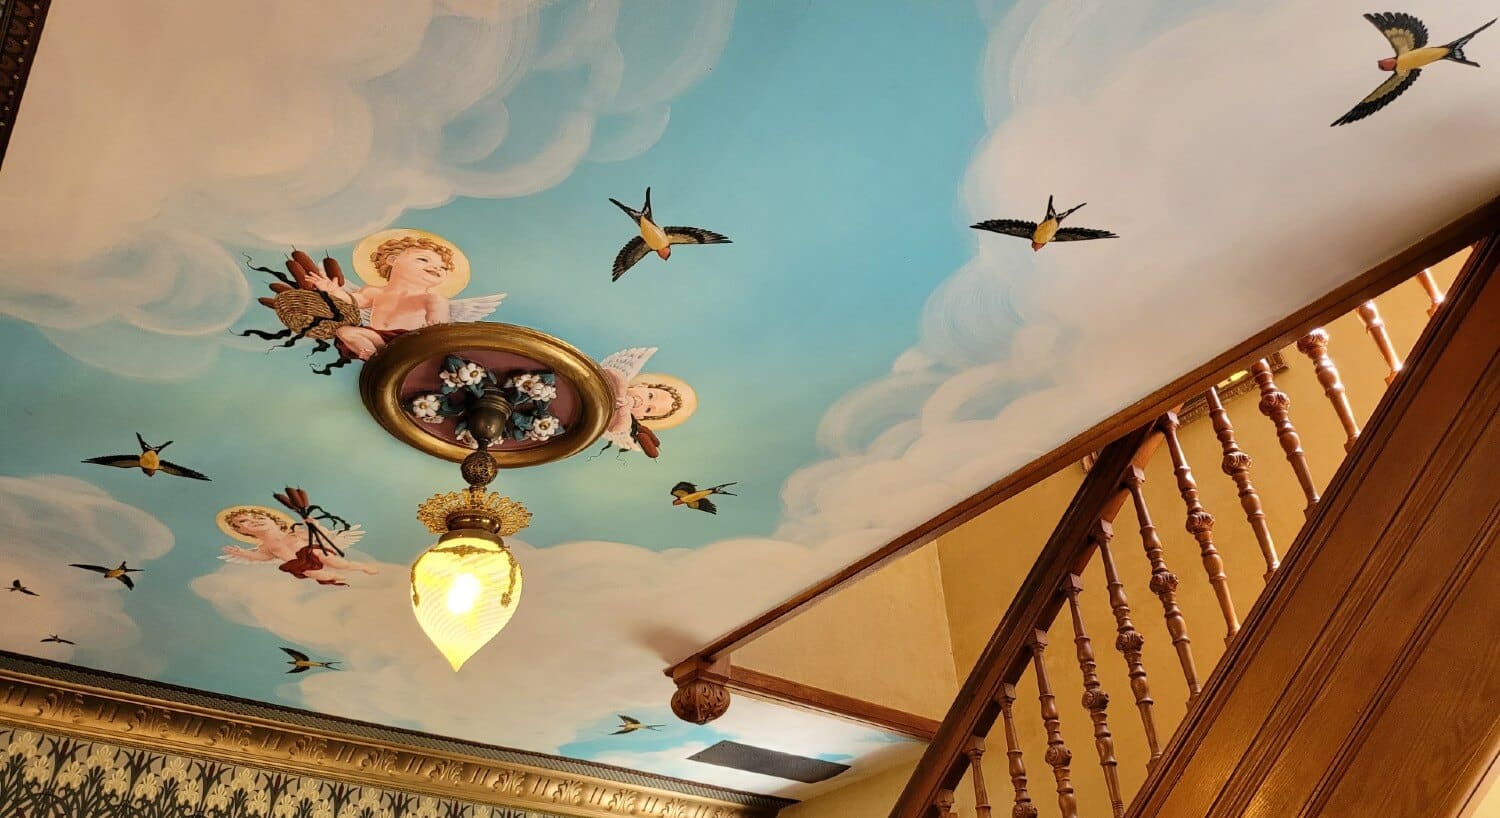 View of a ceiling featuring the painting of angles and birds among clouds and blue skies